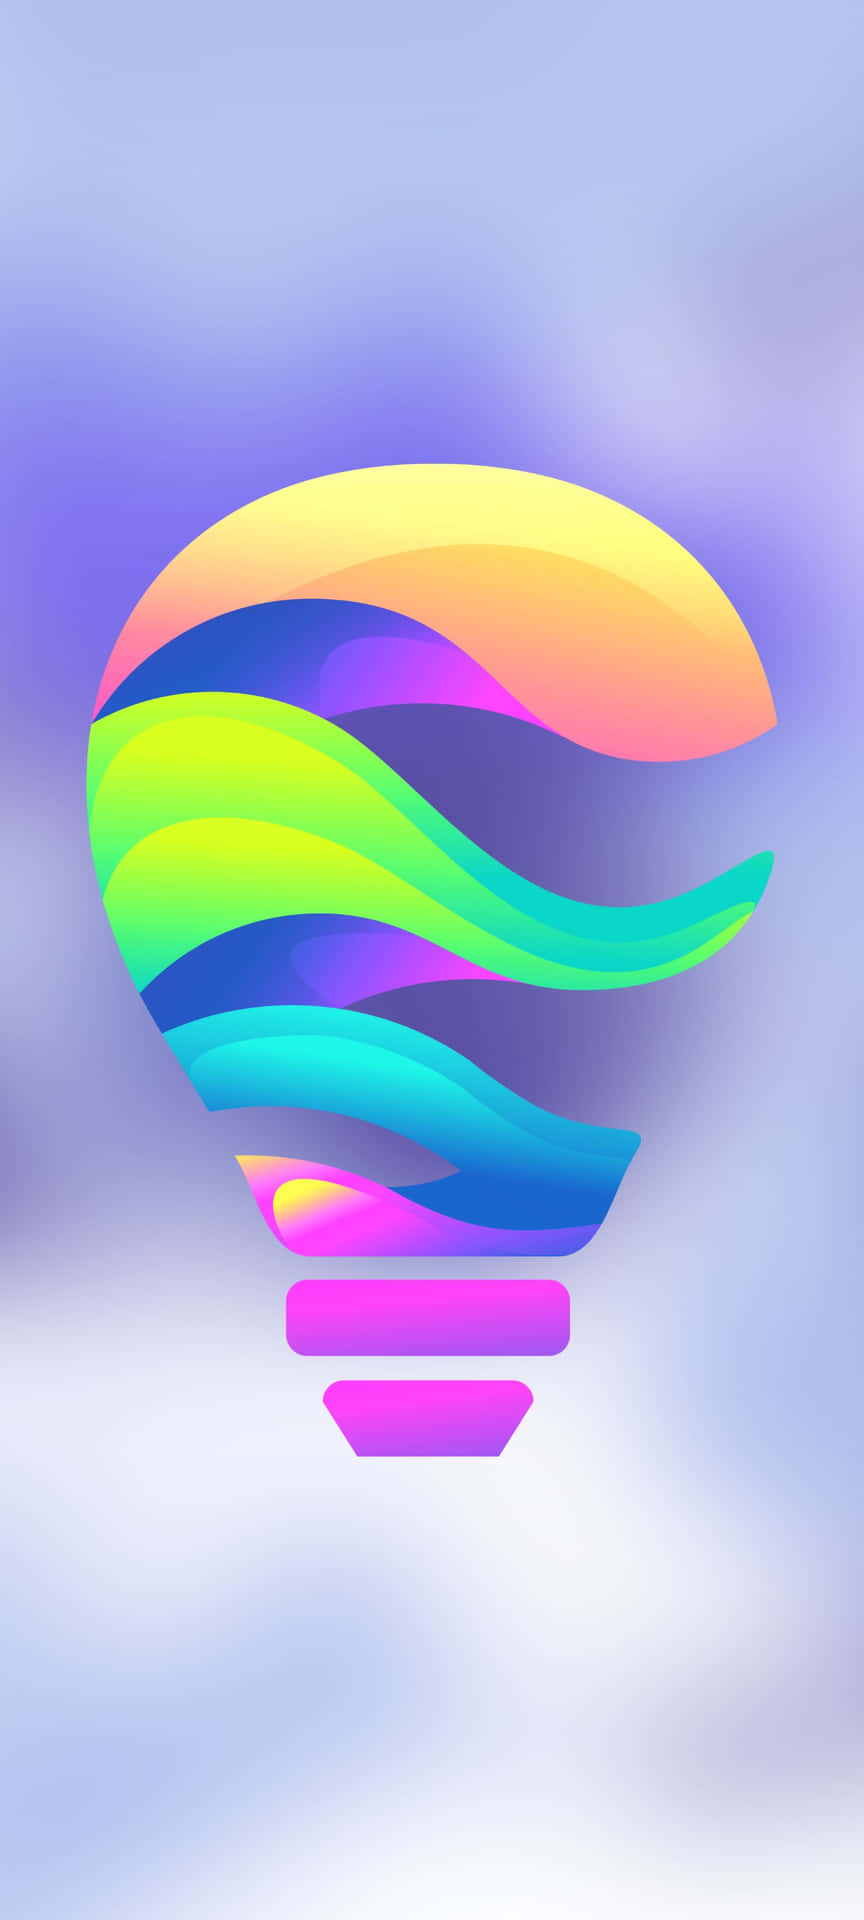 A Colorful Light Bulb With A Rainbow Background Wallpaper